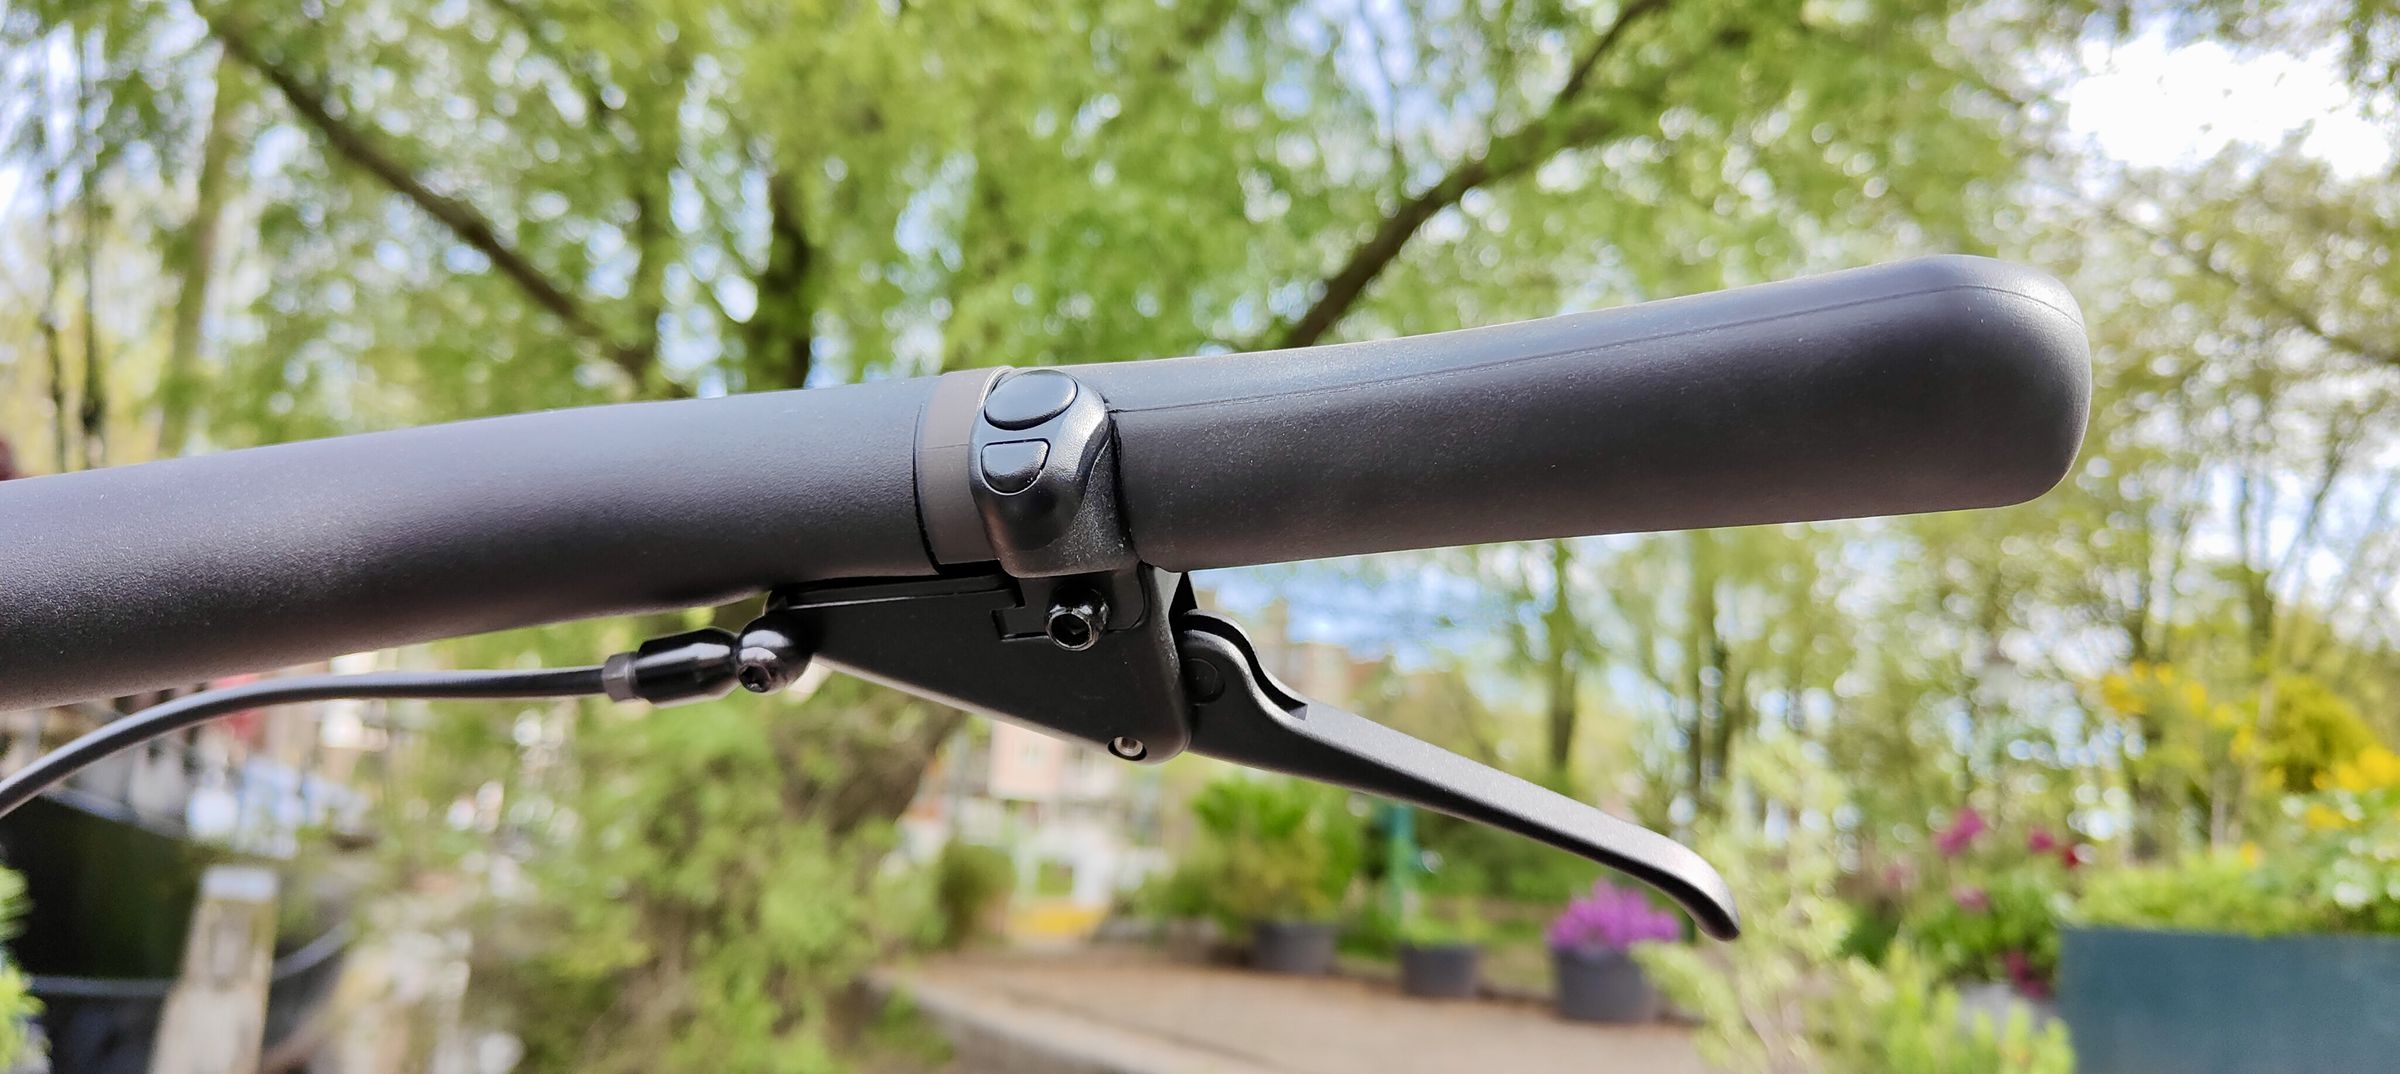 <em>The boost button flanked by smaller multi-function button and hydraulic brake lever.</em>